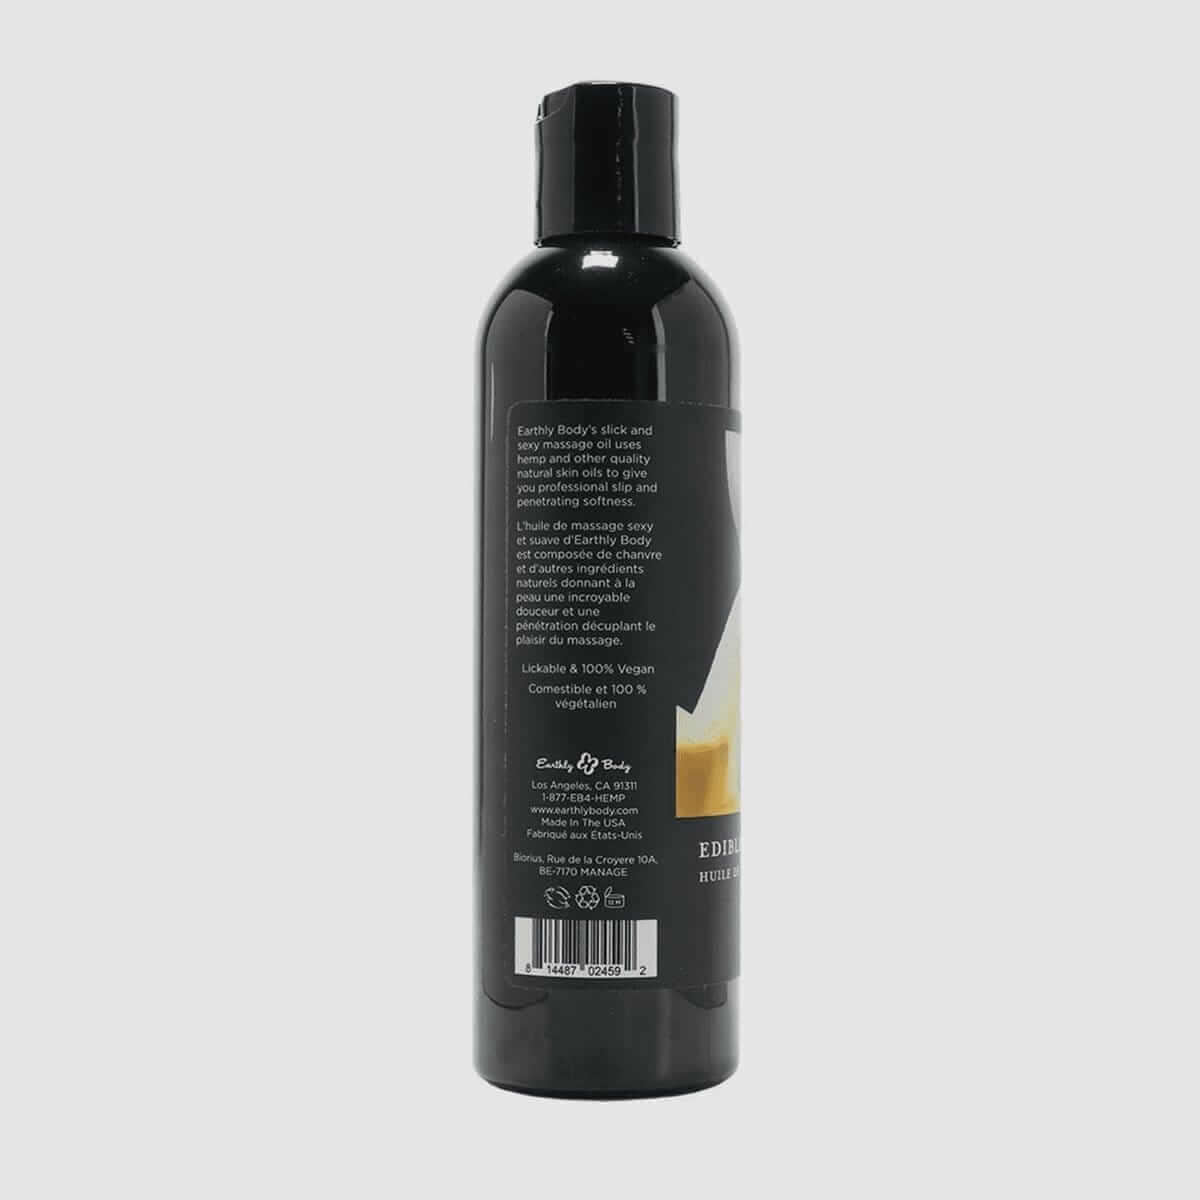 Earthly Body Edible Massage Oil - Banana, 8oz/236ml - Thorn & Feather Sex Toy Canada